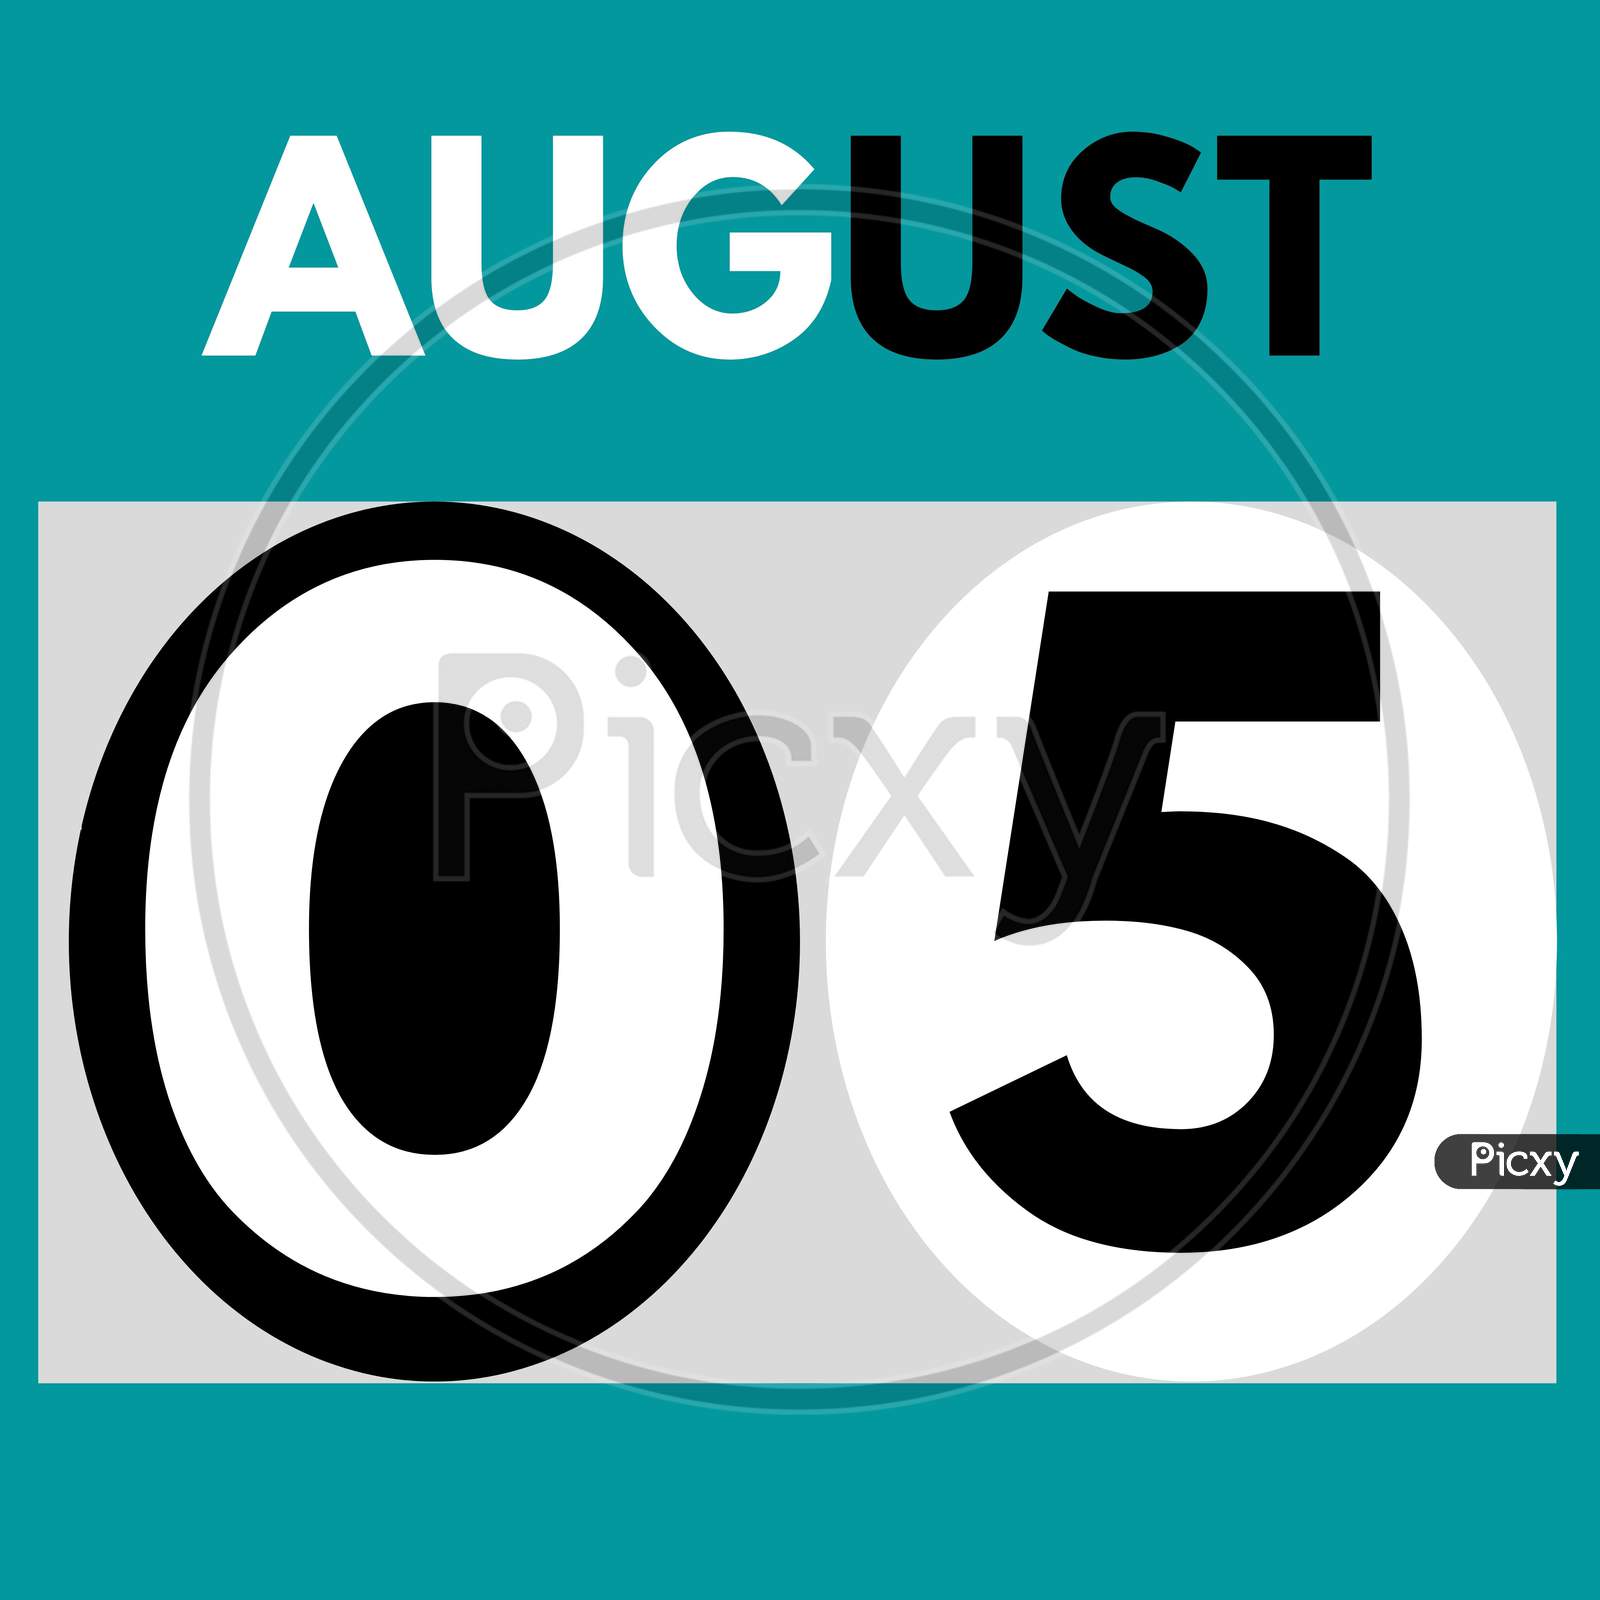 August 5 . Modern Daily Calendar Icon .Date ,Day, Month .Calendar For The Month Of August